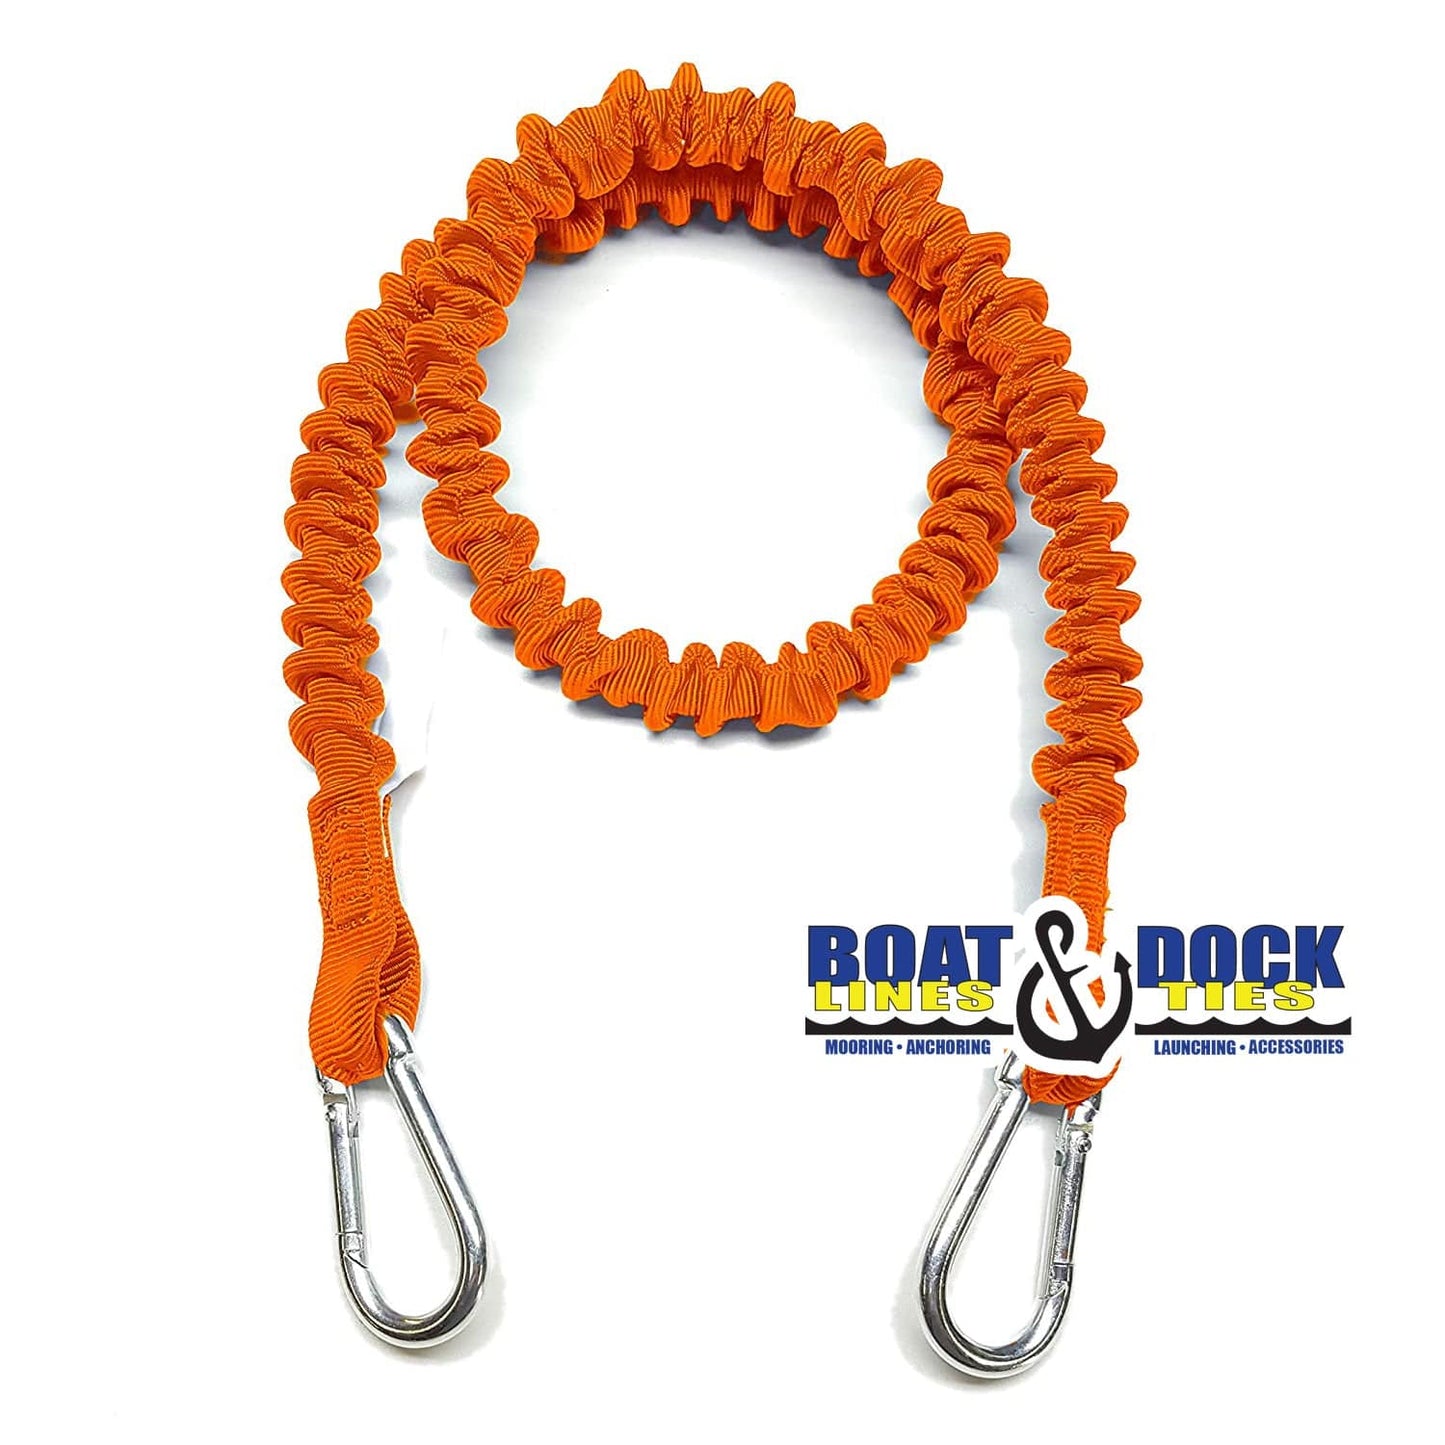 Boat Dock Tie Bungee Cords, 2 Hooked Ends, UV Protected Bungee Cords - Set of 2 - Made in USA - Boat Lines & Dock Ties Boat Lines & Dock Ties 48" / Orange